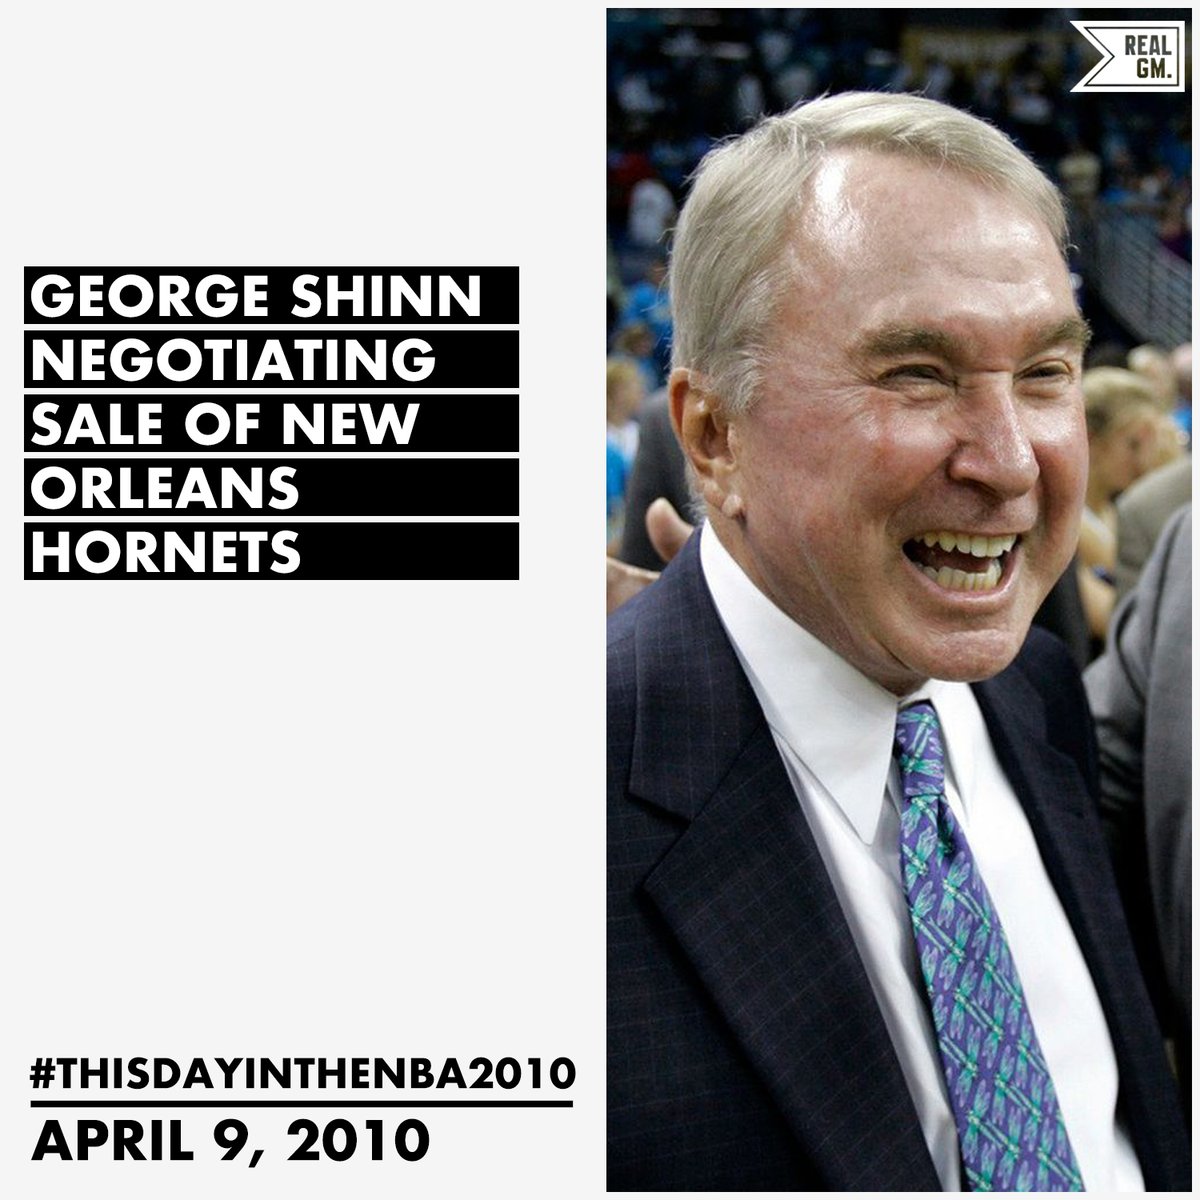  #ThisDayInTheNBA2010April 9, 2010George Shinn Negotiating To Sell New Orleans Hornets https://basketball.realgm.com/wiretap/203188/George-Shinn-Negotiating-To-Sell-New-Orleans-Hornets